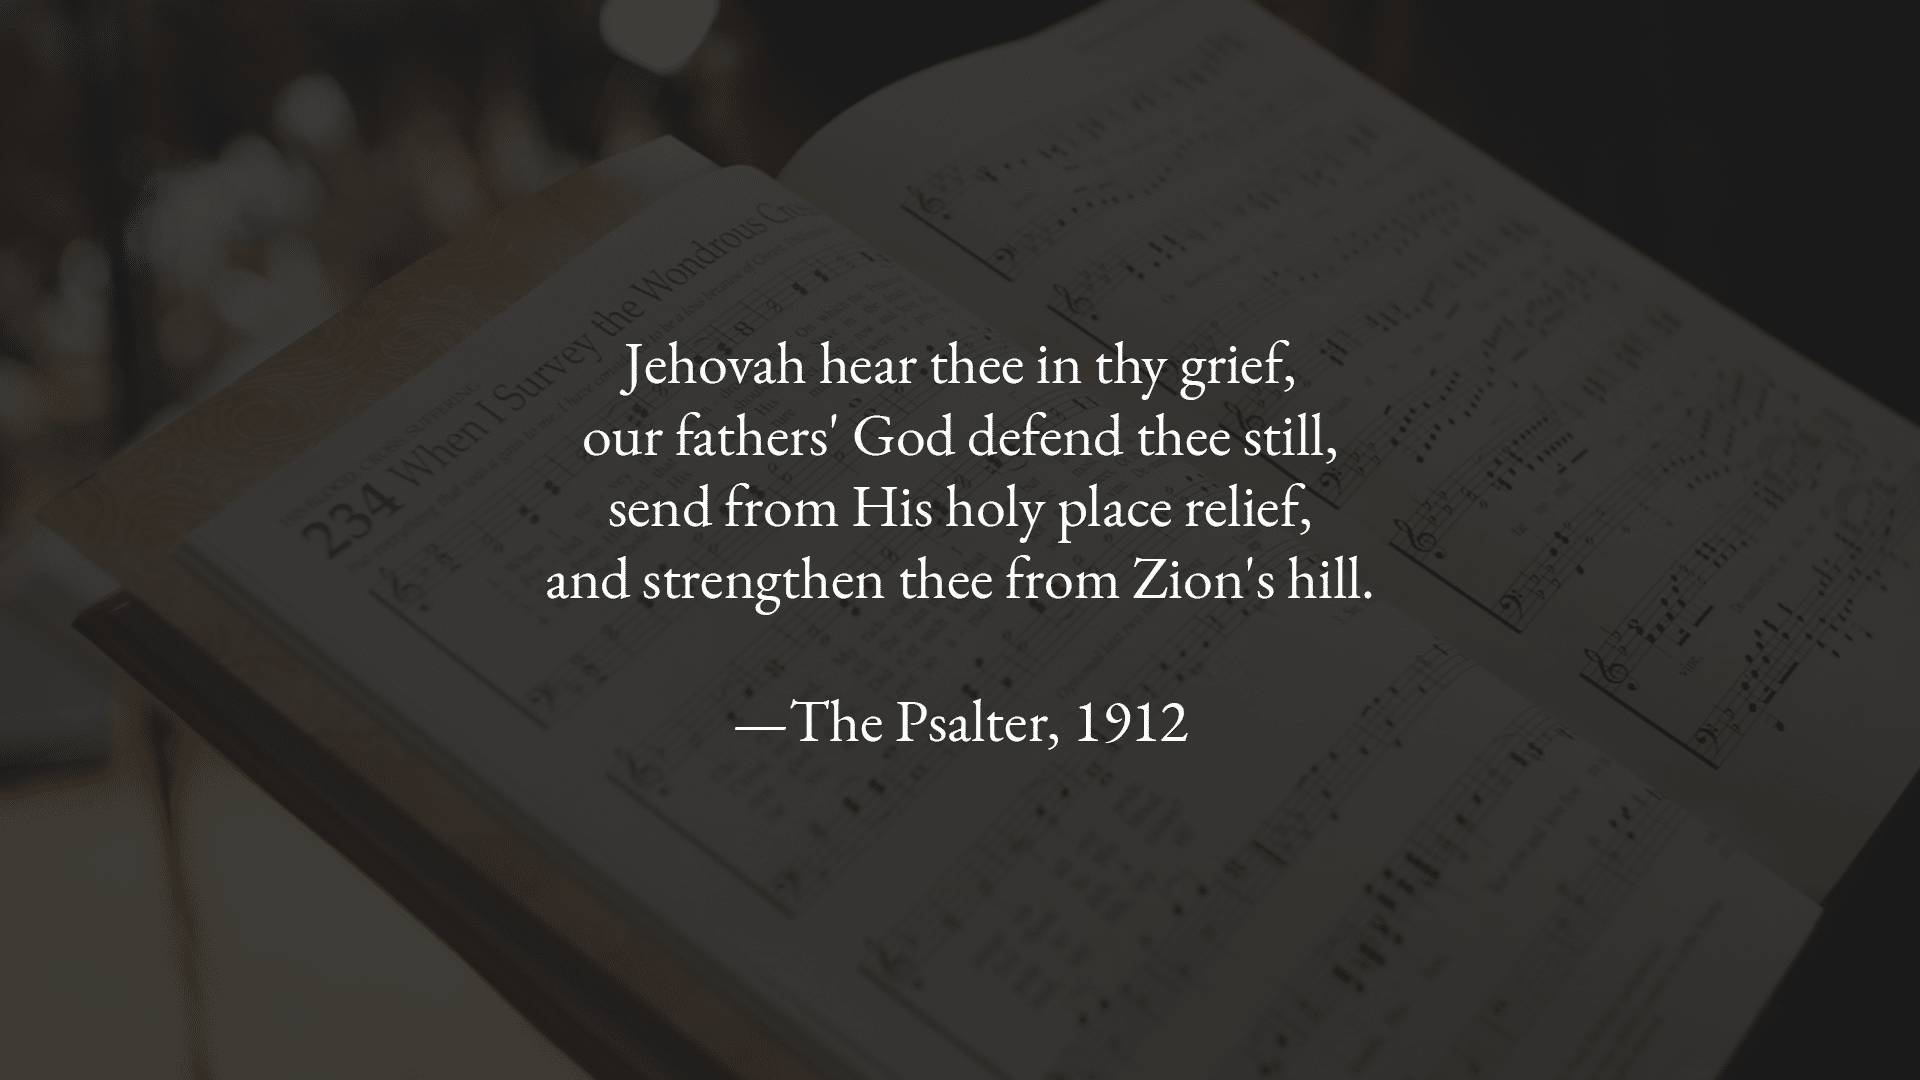 Jehovah Hear Thee in Thy Grief (Ps 20)